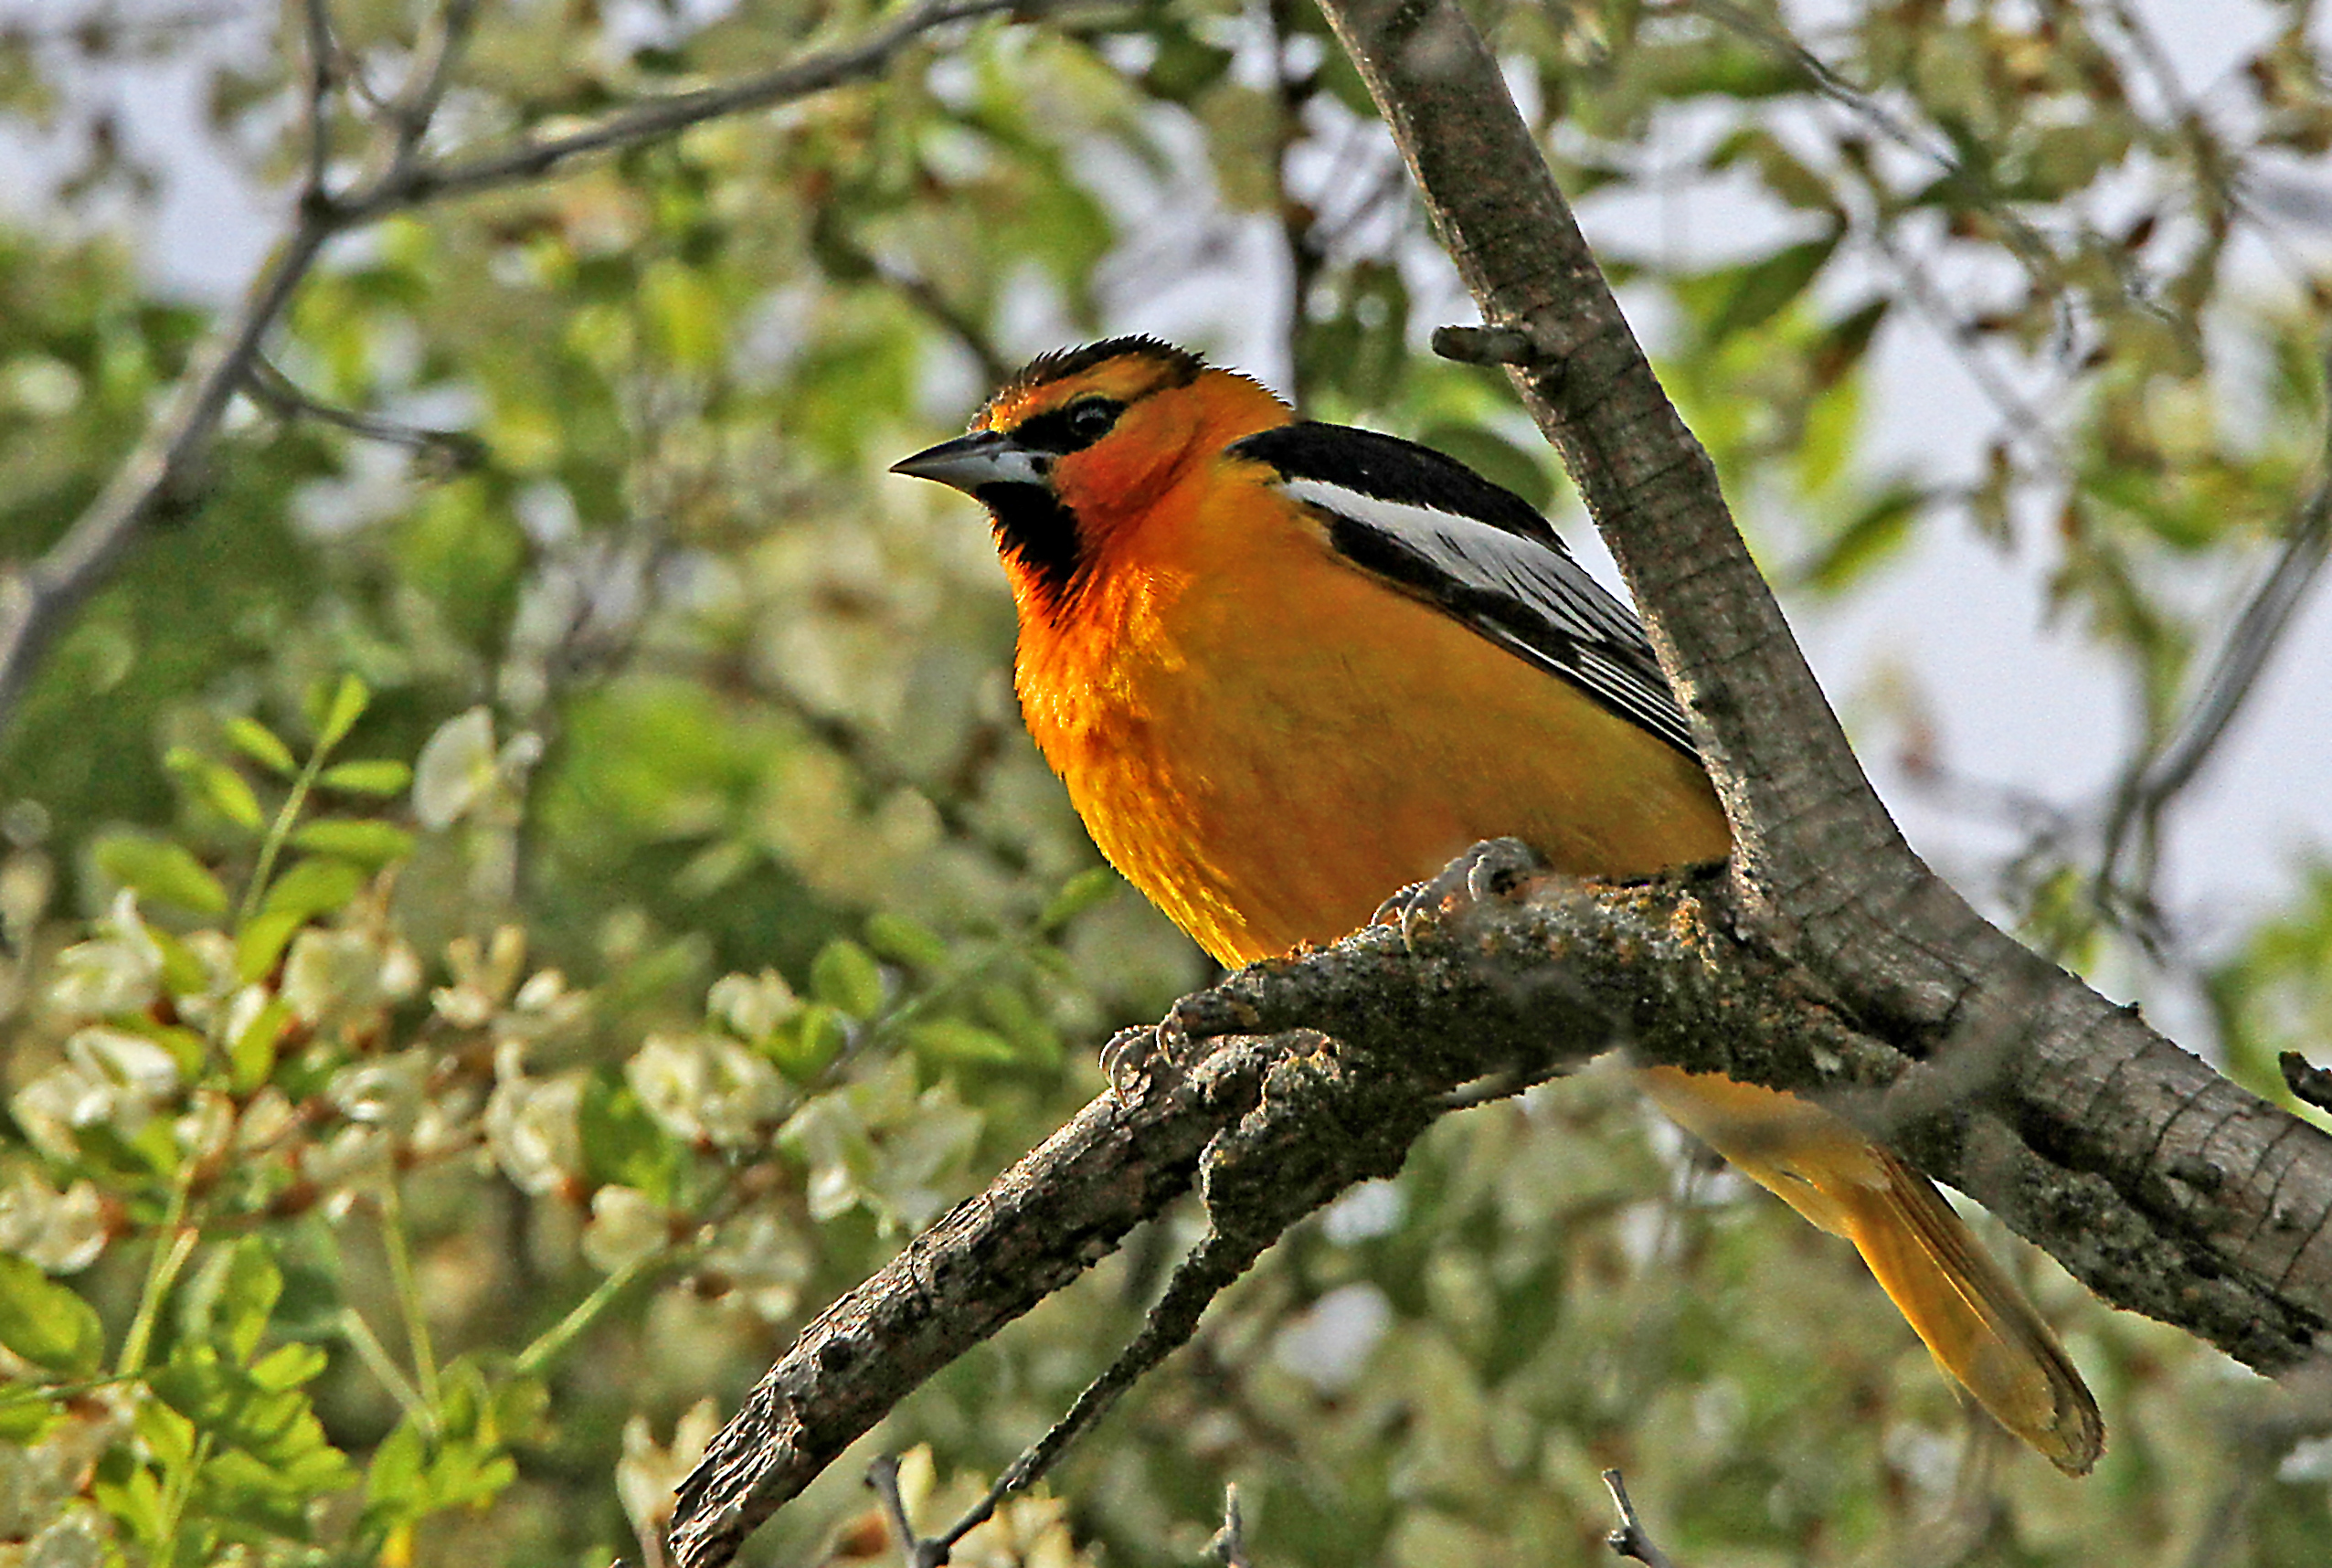 A Bullock's Oriole (a neotropical migrant) orange marmalade colors, are vibrant among the newly leafed branches at Turnbull NWR